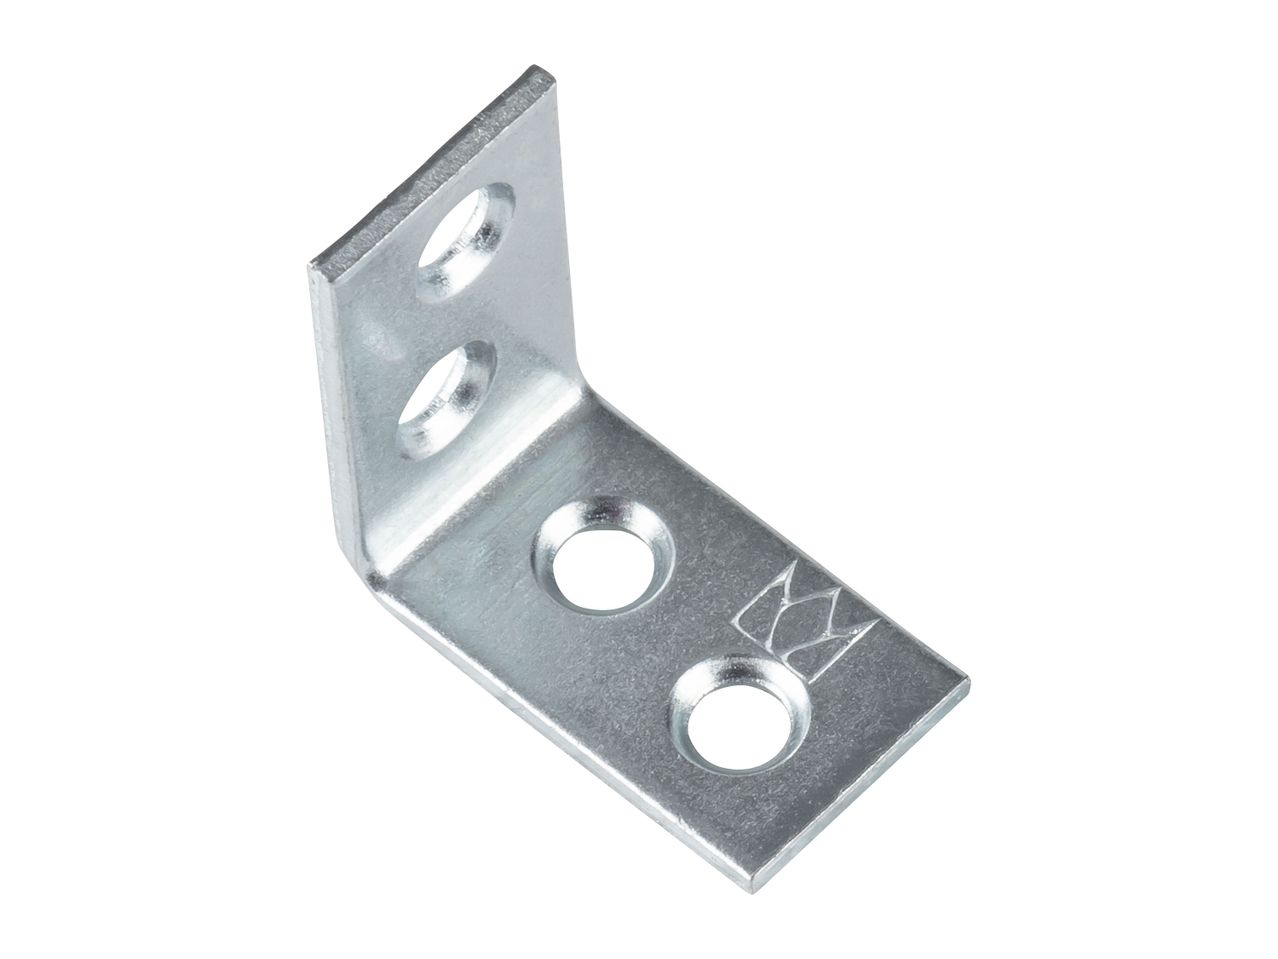 Go to full screen view: PARKSIDE Angle Brackets / Mending Plates / T-Brackets / Corner Braces - Image 4